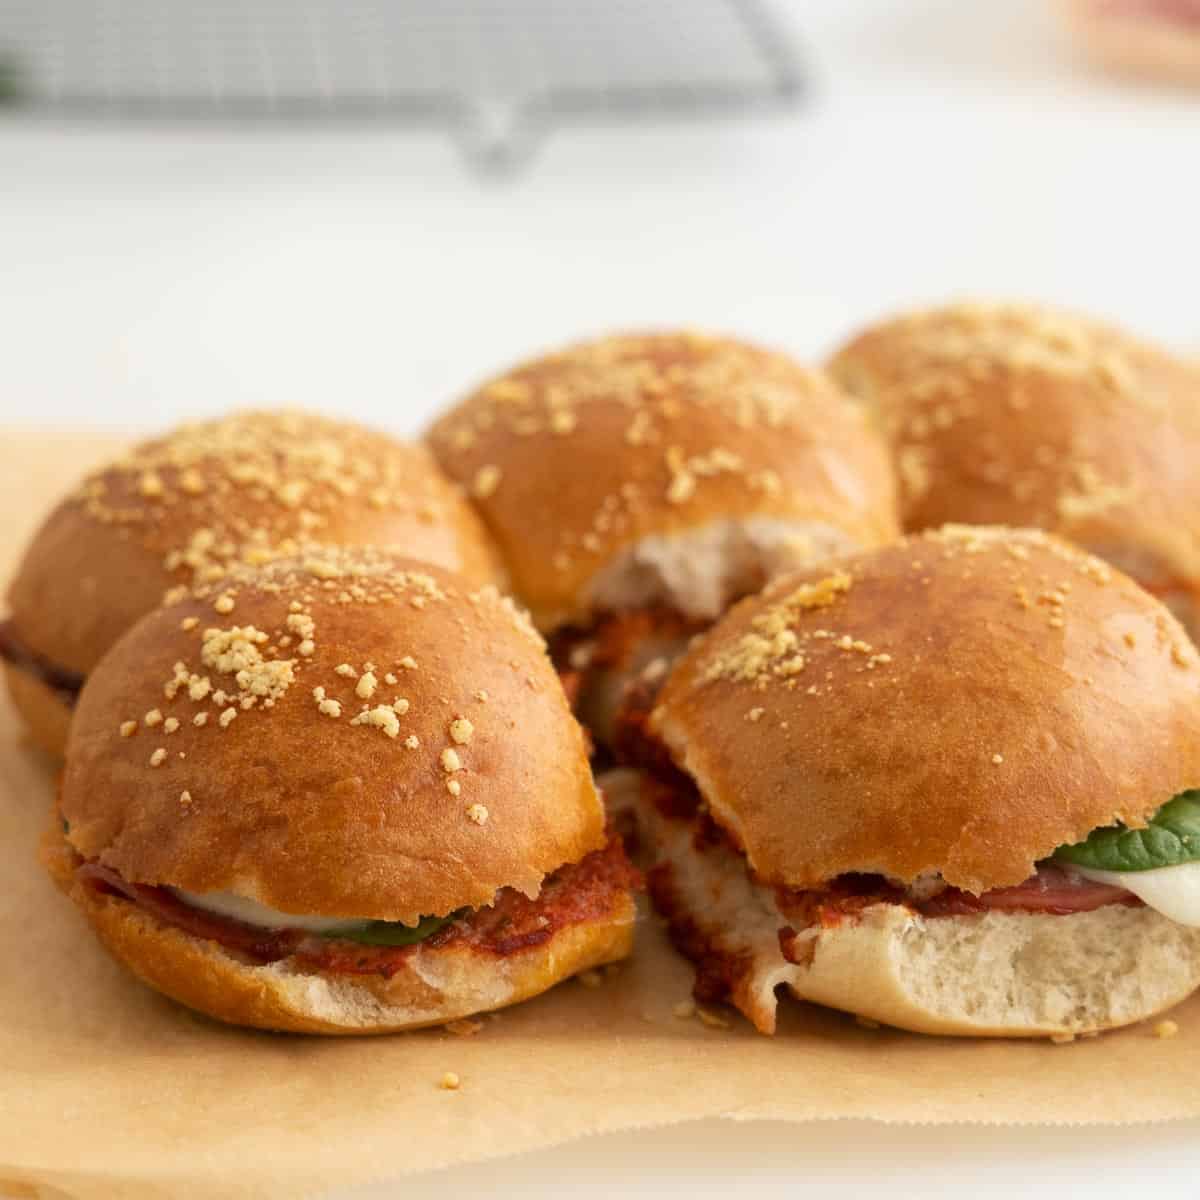 Toasted sliders sitting on a sheet of baking paper.